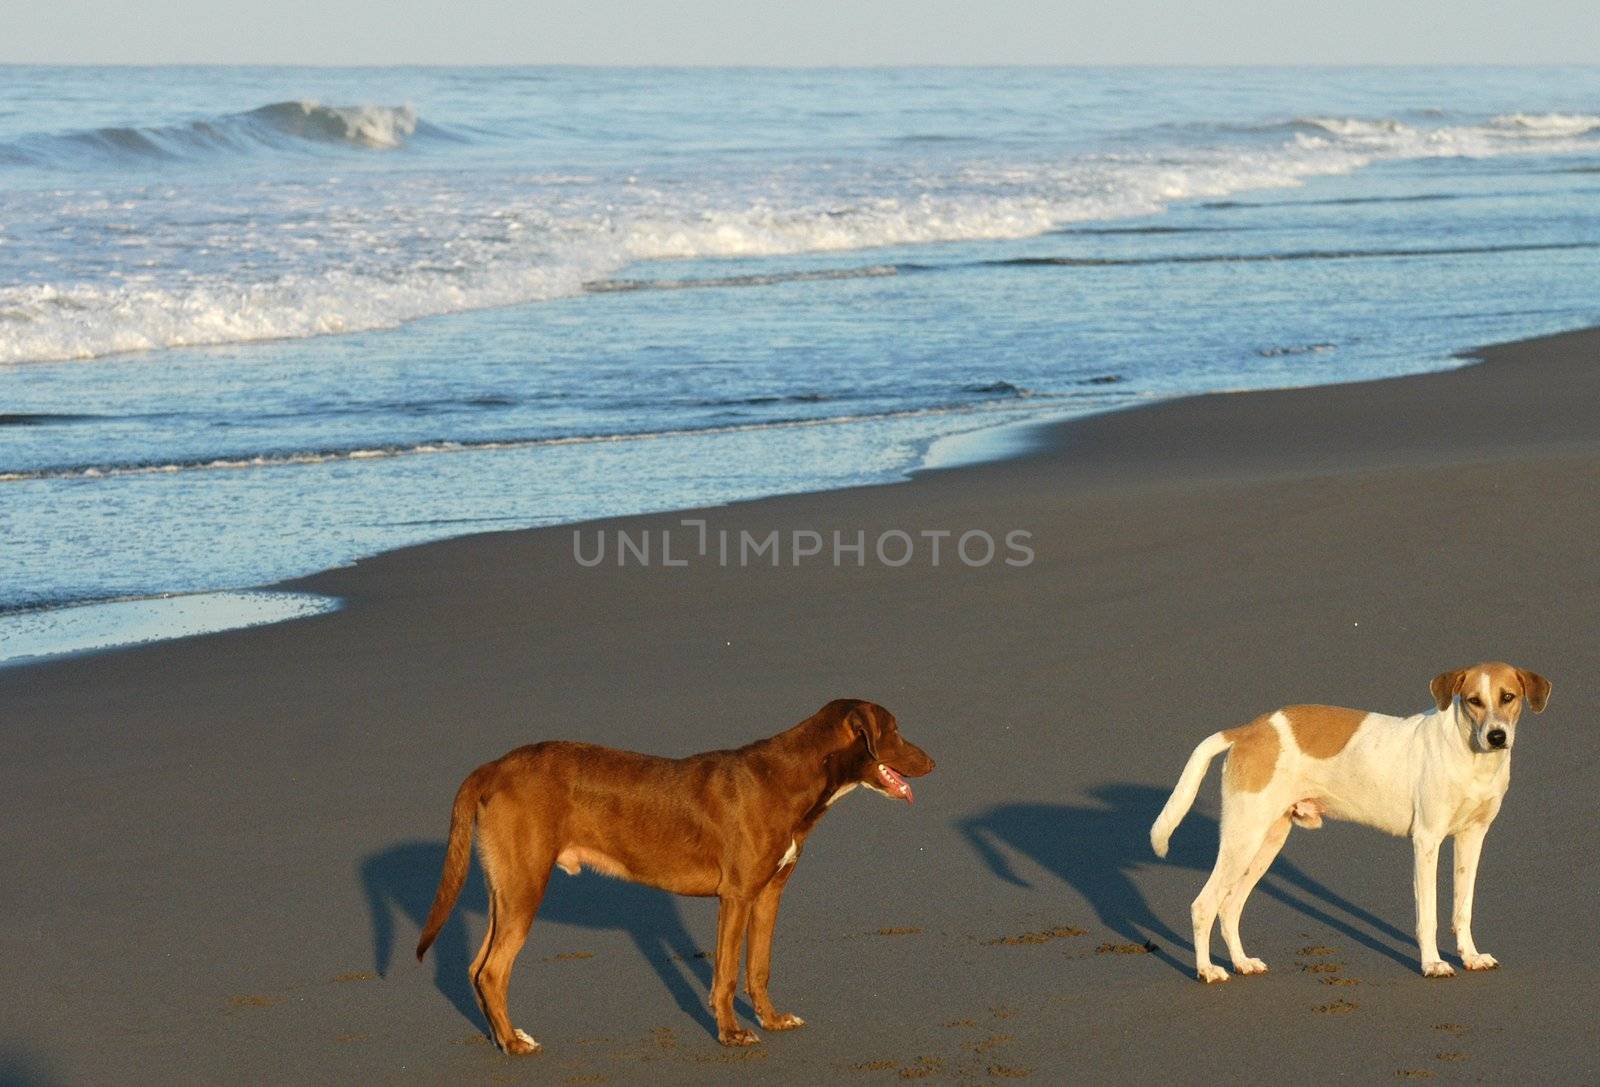 Two dogs on beach in Puerto arista, Mexico by haak78